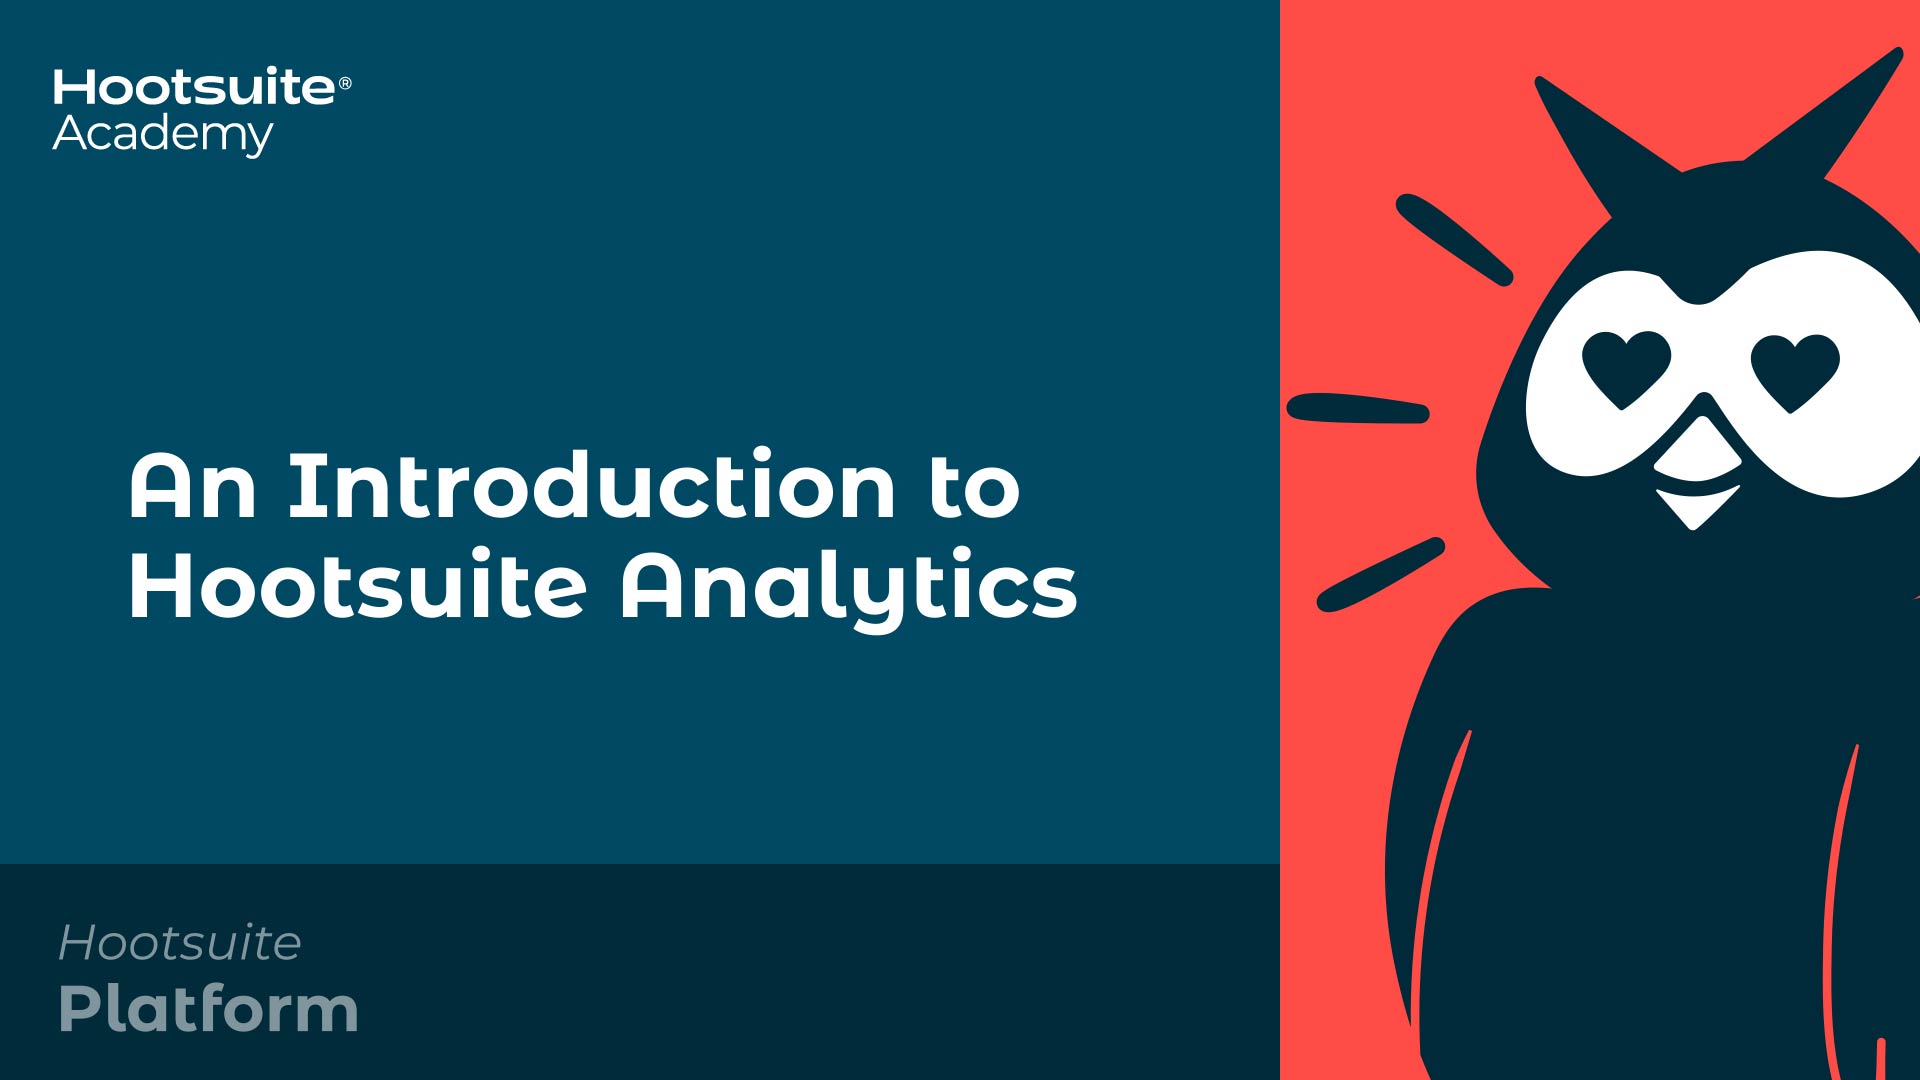 Introduction to hootsuite analytics video.